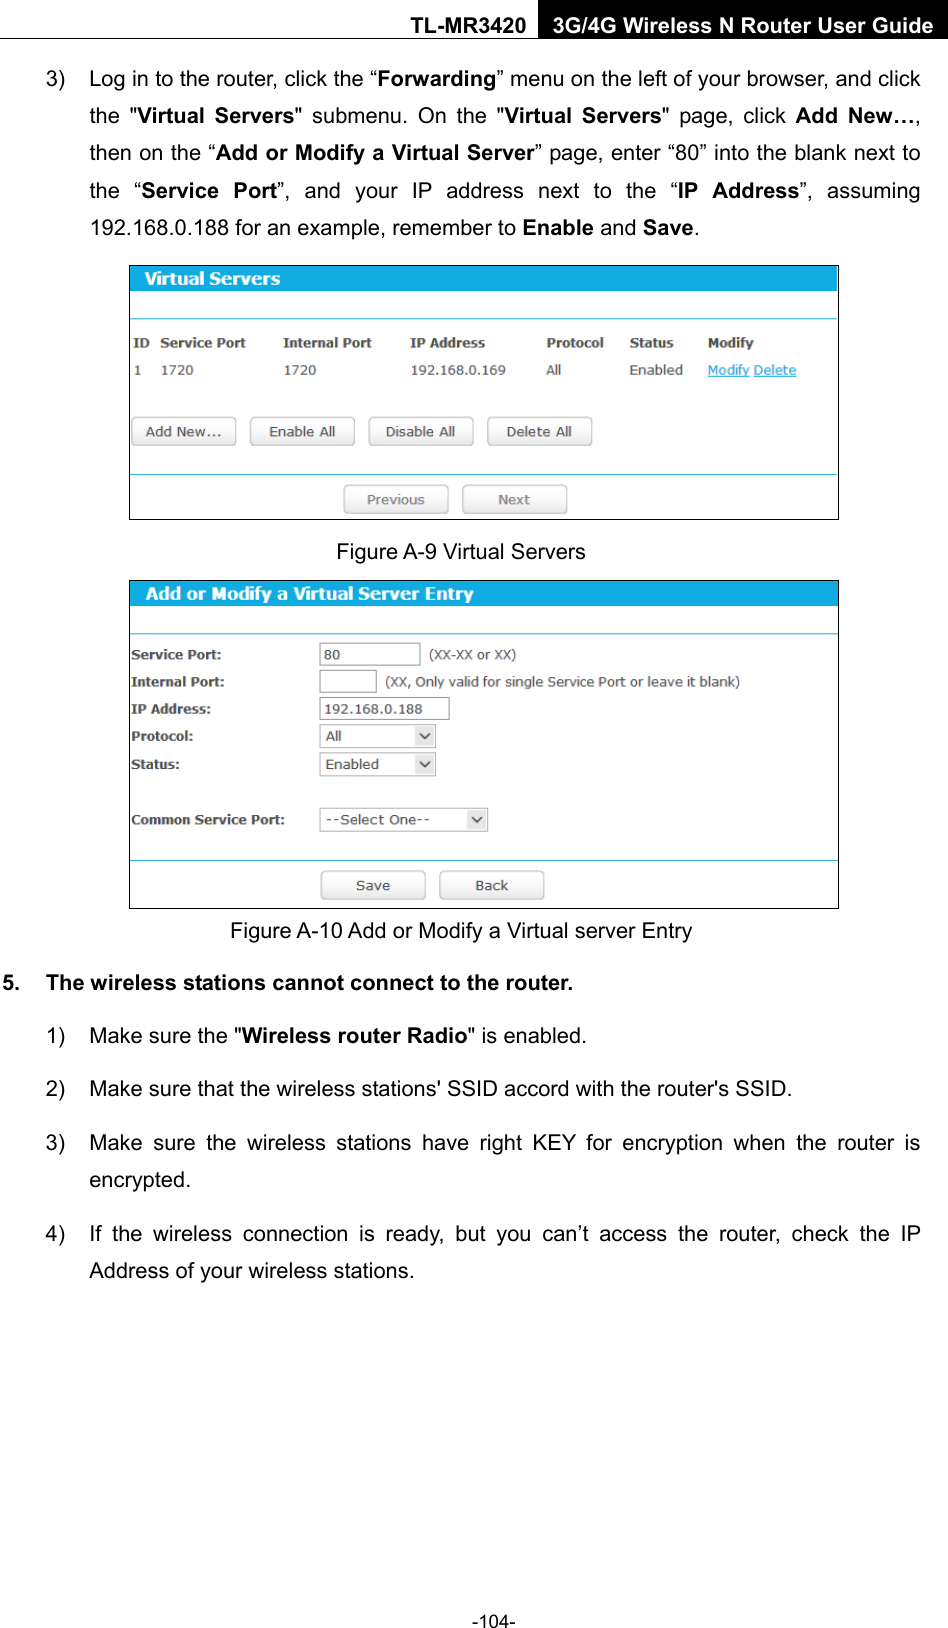    -104- TL-MR3420 3G/4G Wireless N Router User Guide 3) Log in to the router, click the “Forwarding” menu on the left of your browser, and click the &quot;Virtual Servers&quot; submenu. On the &quot;Virtual Servers&quot; page, click Add New…, then on the “Add or Modify a Virtual Server” page, enter “80” into the blank next to the “Service Port”, and your IP address next to the “IP Address”, assuming 192.168.0.188 for an example, remember to Enable and Save.  Figure A-9 Virtual Servers  Figure A-10 Add or Modify a Virtual server Entry 5. The wireless stations cannot connect to the router. 1) Make sure the &quot;Wireless router Radio&quot; is enabled. 2) Make sure that the wireless stations&apos; SSID accord with the router&apos;s SSID. 3) Make sure the wireless stations have right KEY for encryption when the router is encrypted. 4) If the wireless connection is ready, but you can’t access the router, check the IP Address of your wireless stations. 